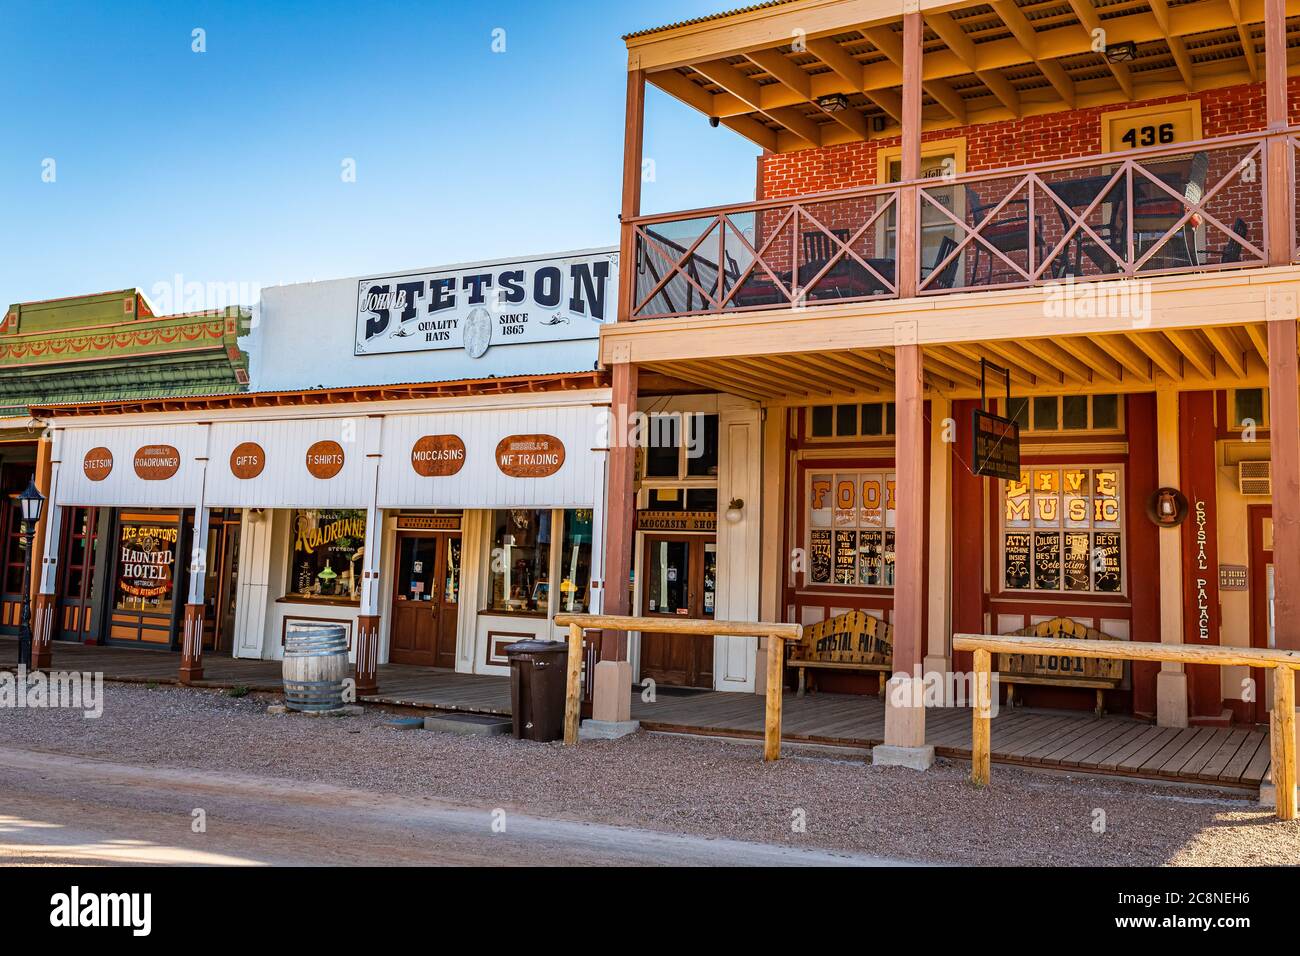 Tombstone, Arizona, USA - March 2, 2019: Morning view of Allen Street in the famous Old West Town Historic District Stock Photo